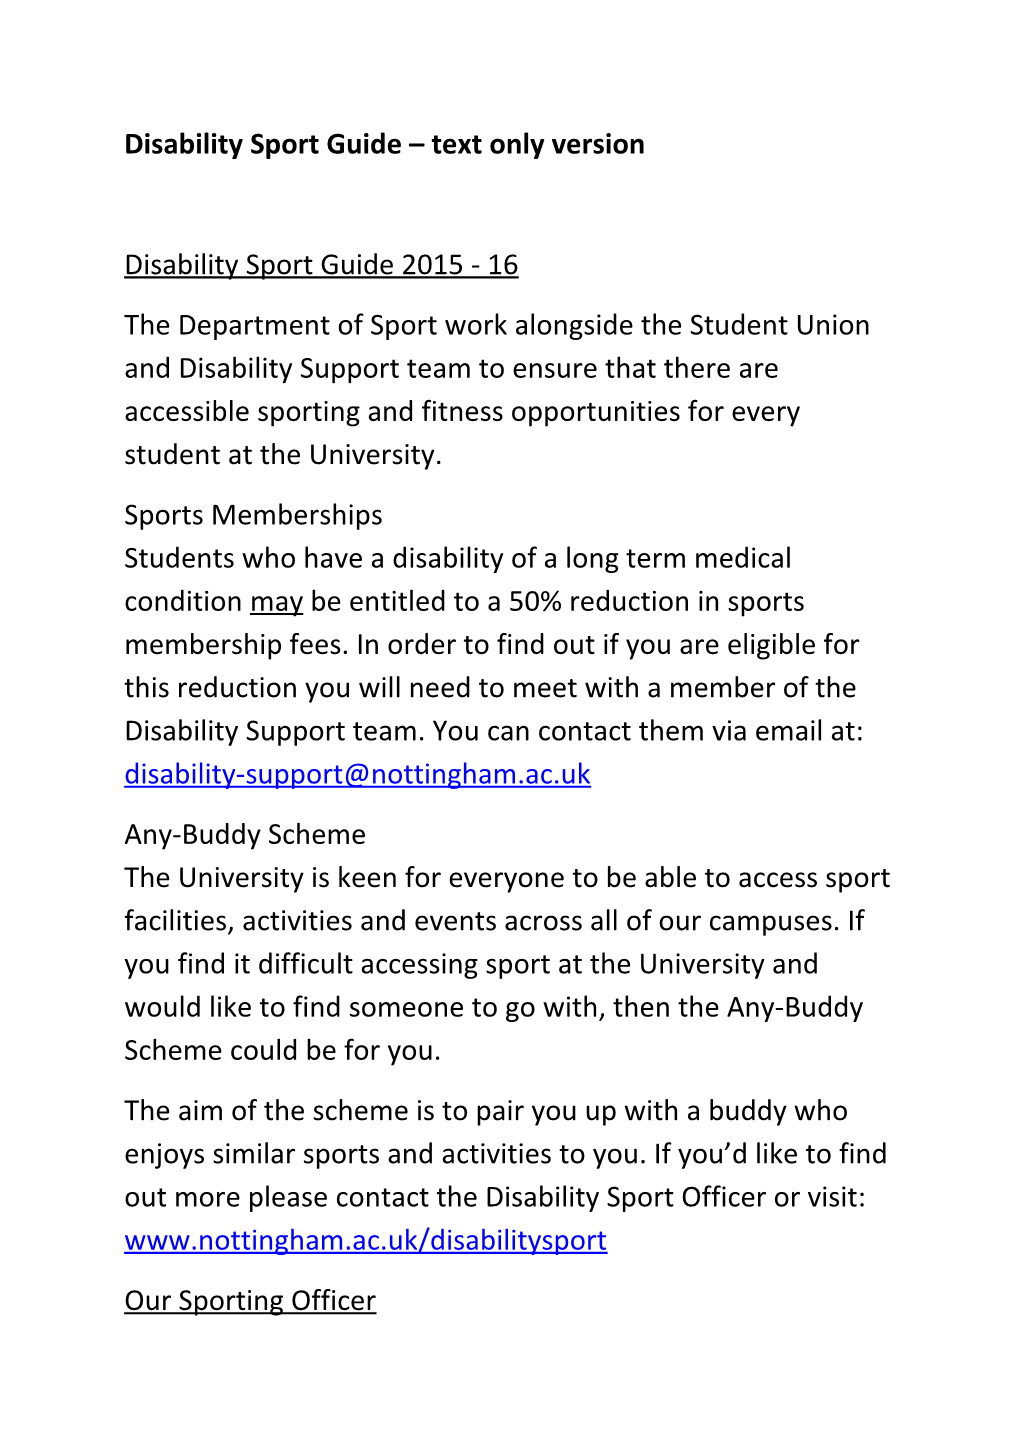 Disability-Sport-Guide-15-16-Text-Version